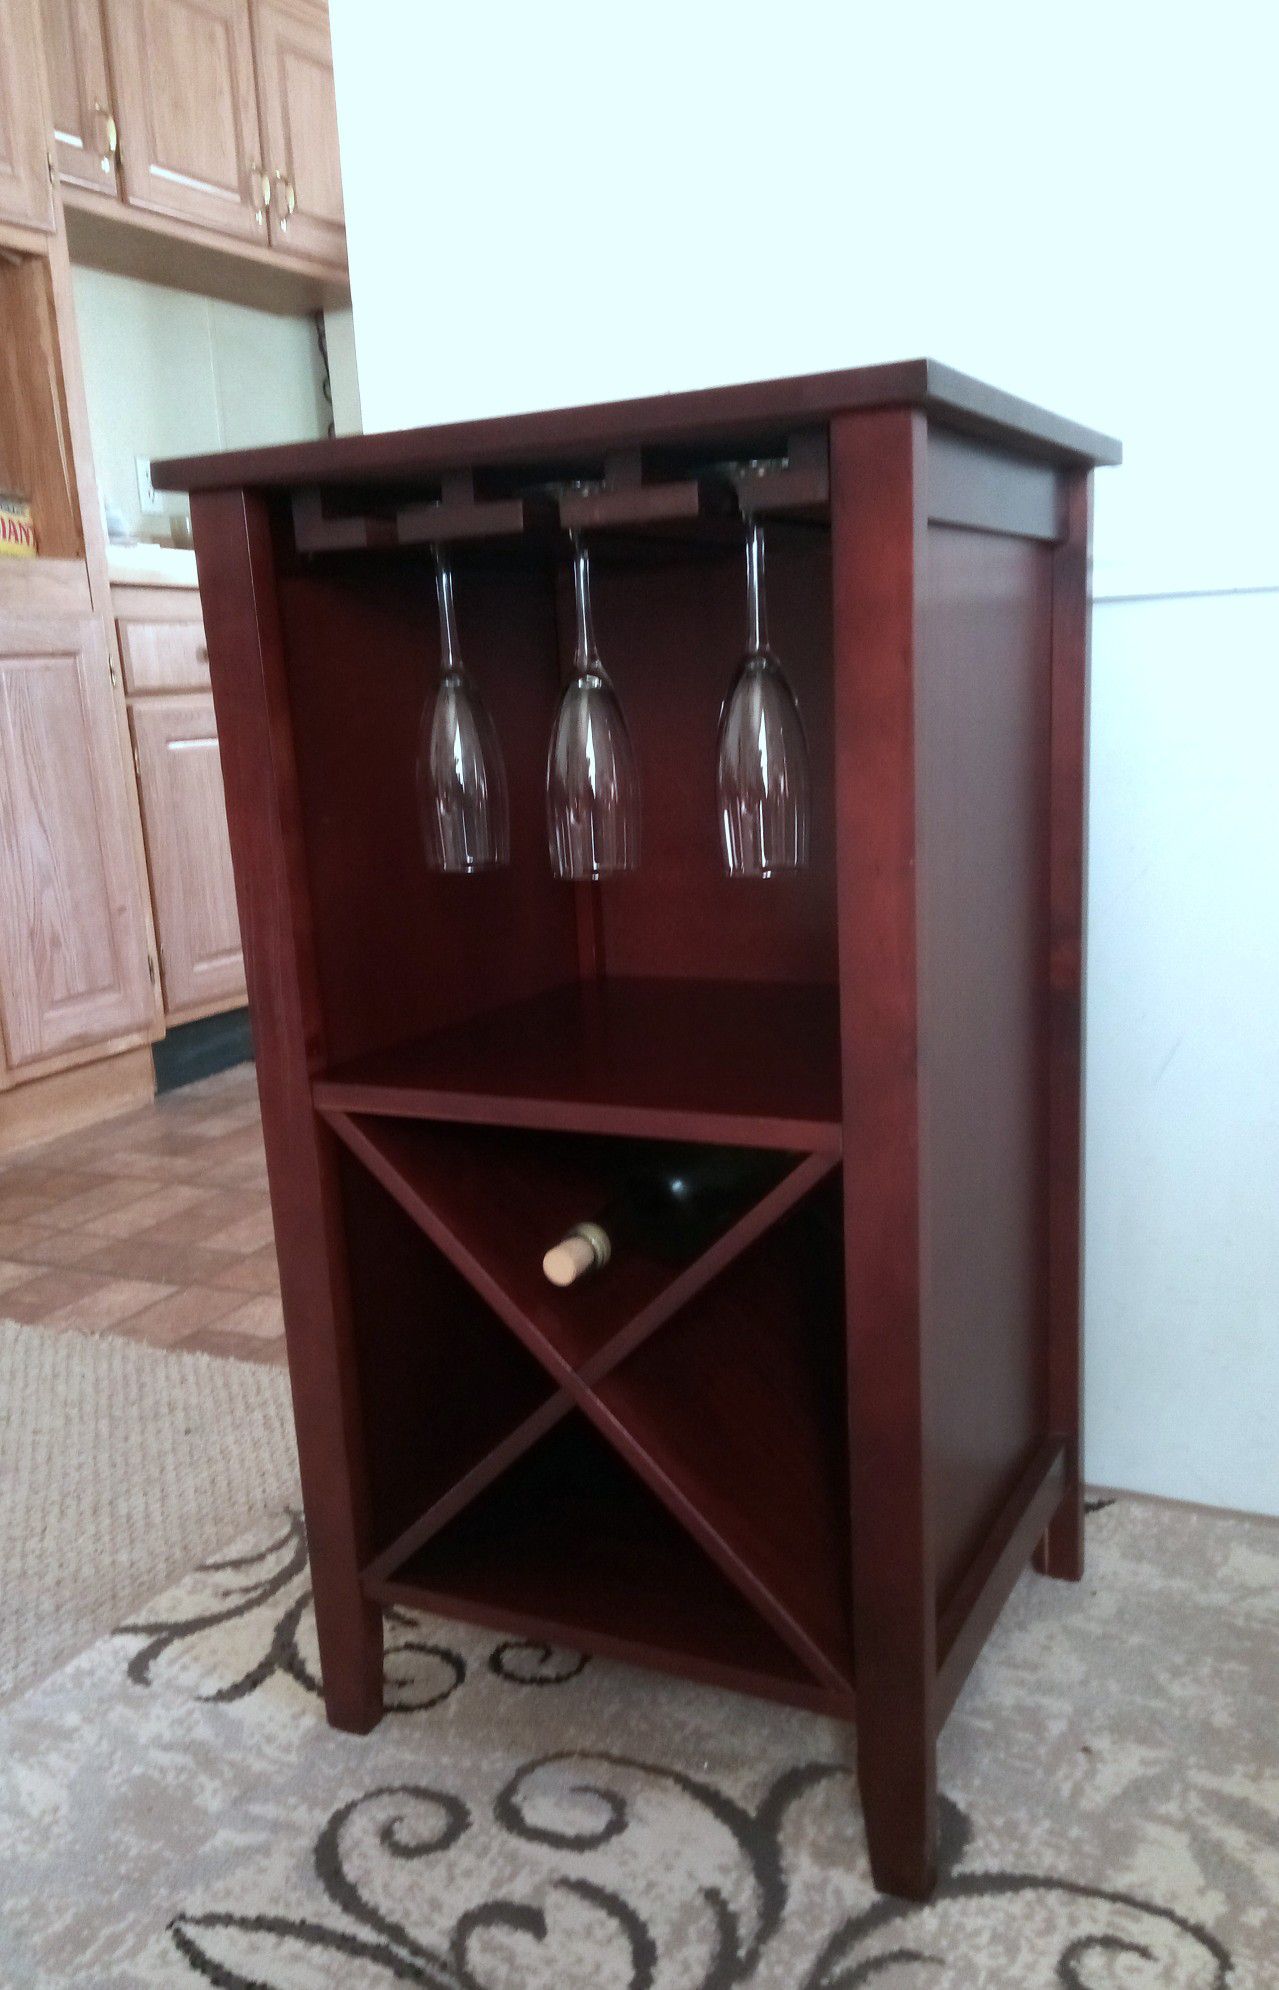 SOLID WOOD WINE RACK ACCENT TABLE W/ WINE GLASS STORAGE/ END TABLE